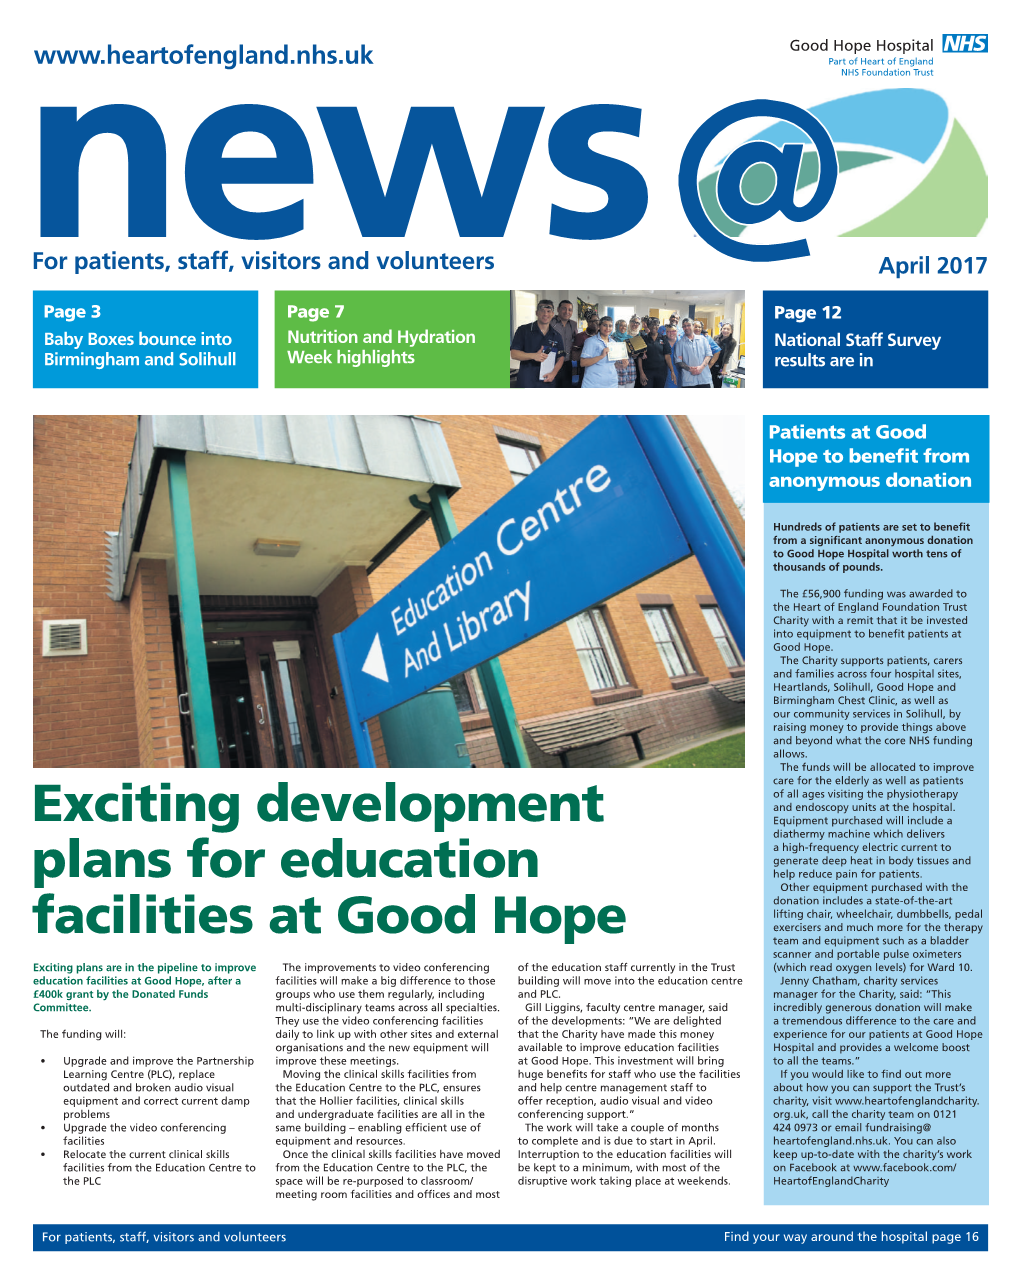 Exciting Development Plans for Education Facilities at Good Hope